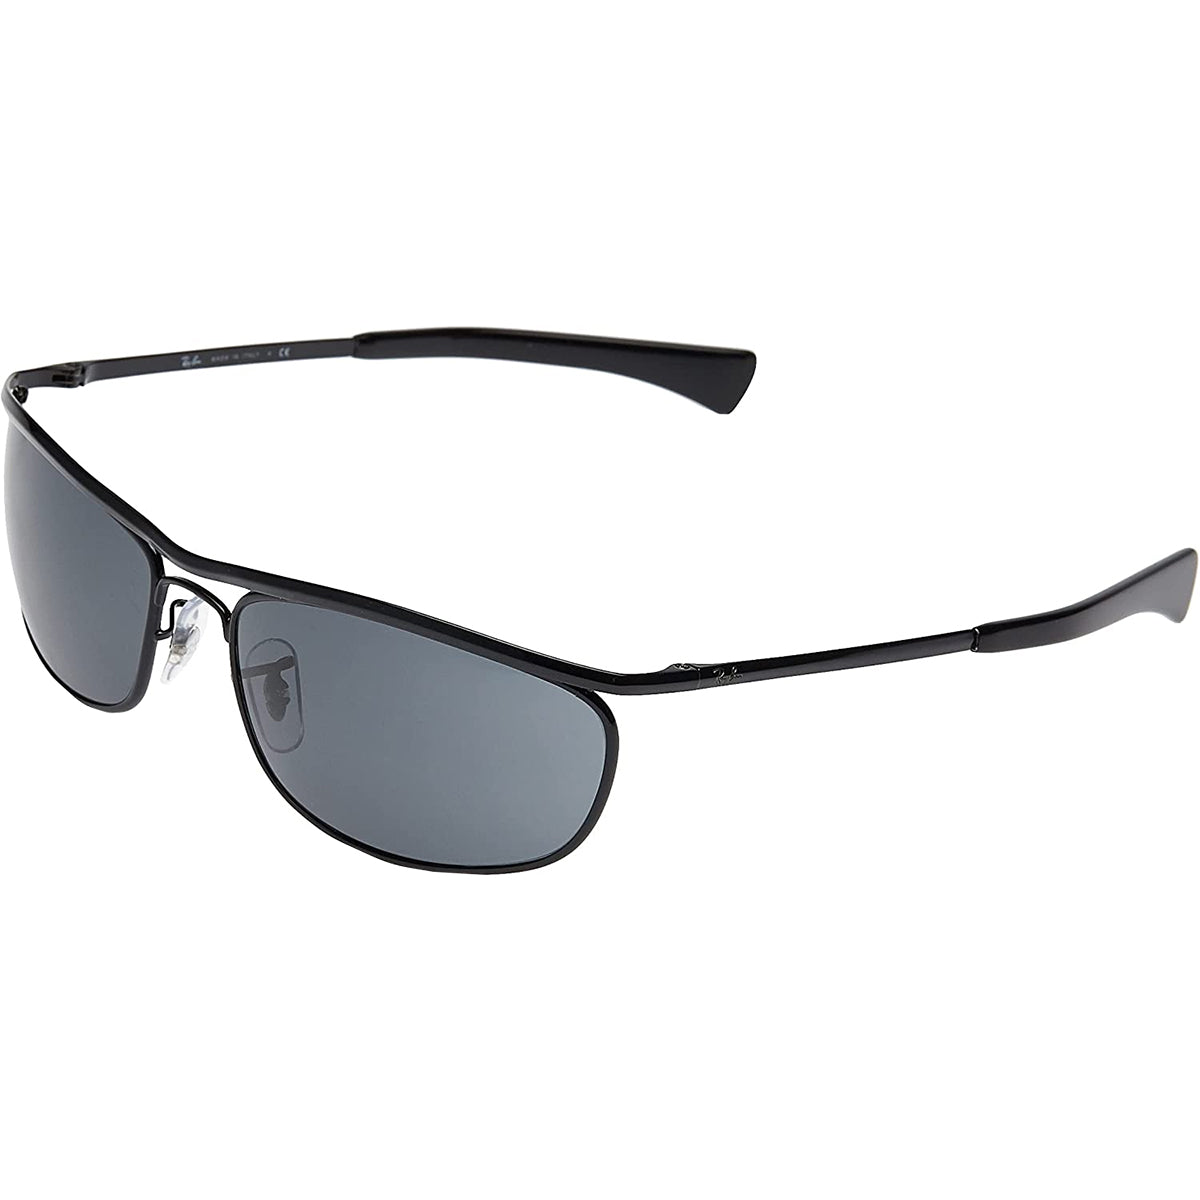 Ray-Ban Olympian I Deluxe Adult Lifestyle Sunglasses